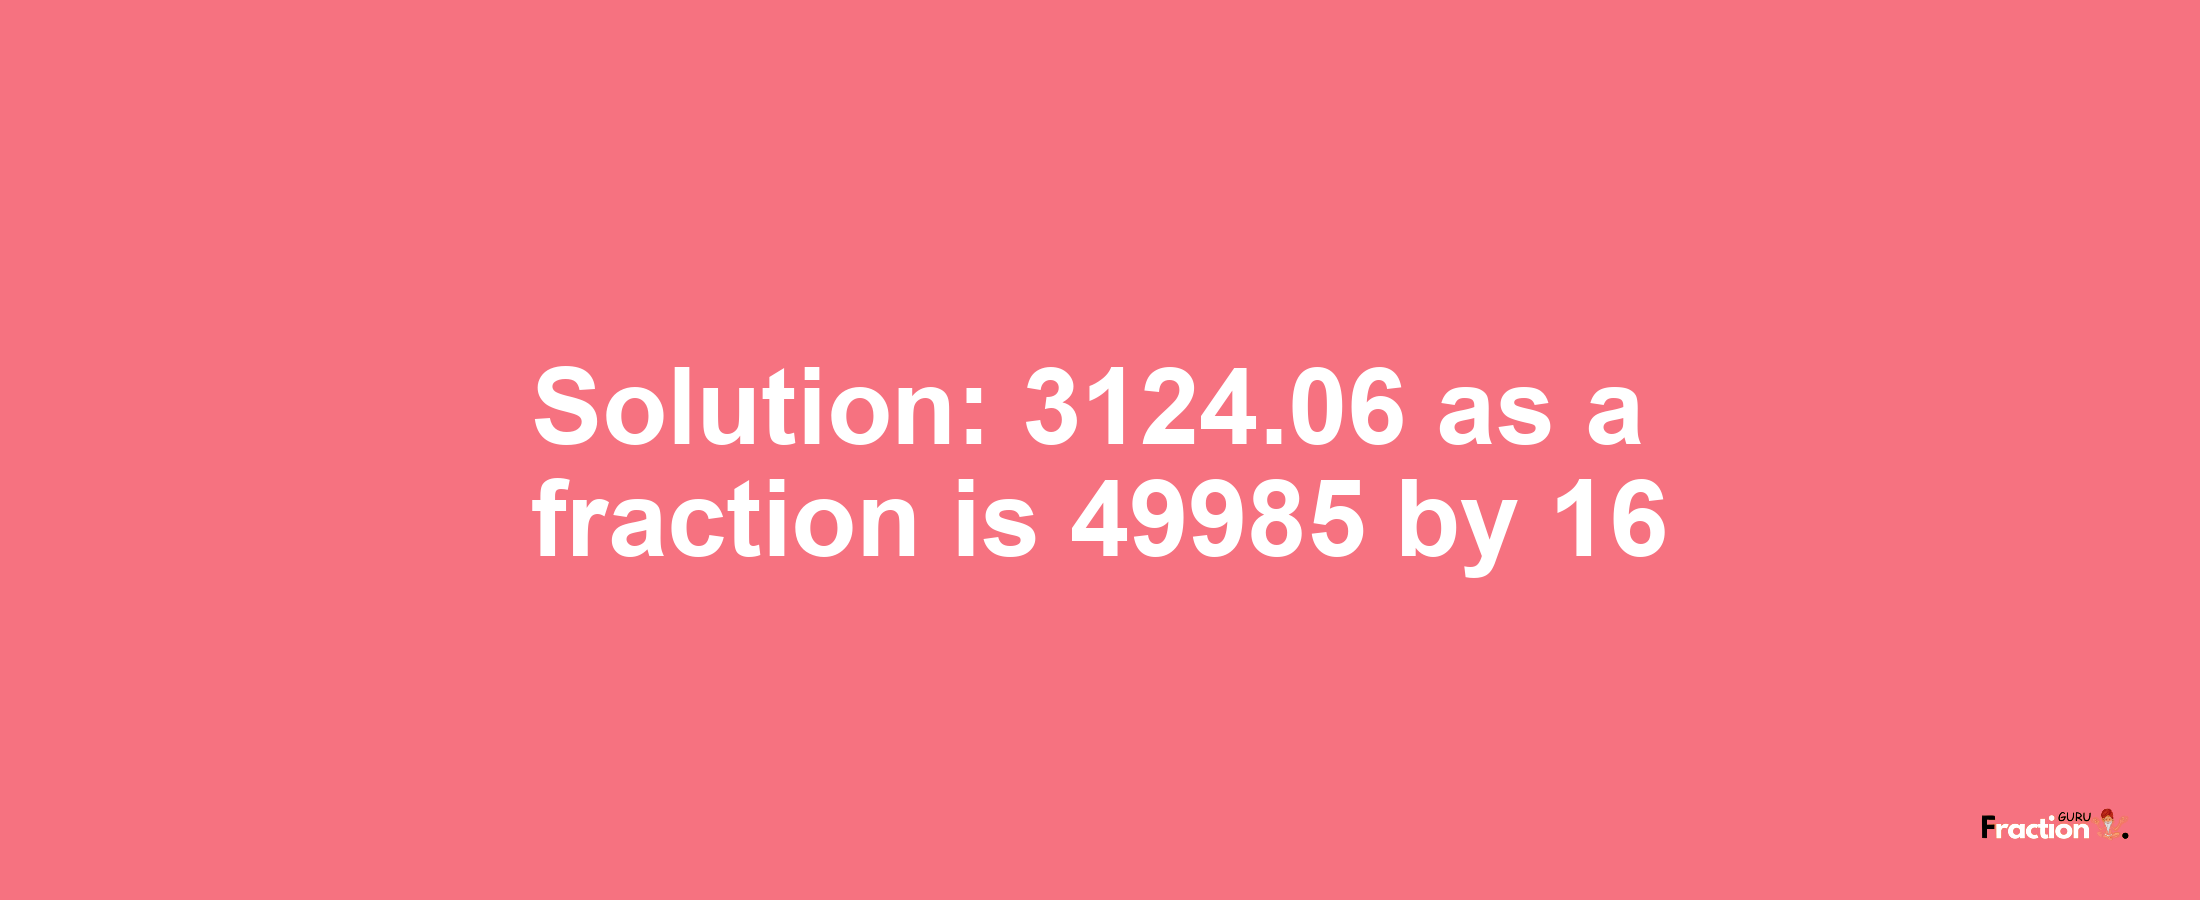 Solution:3124.06 as a fraction is 49985/16